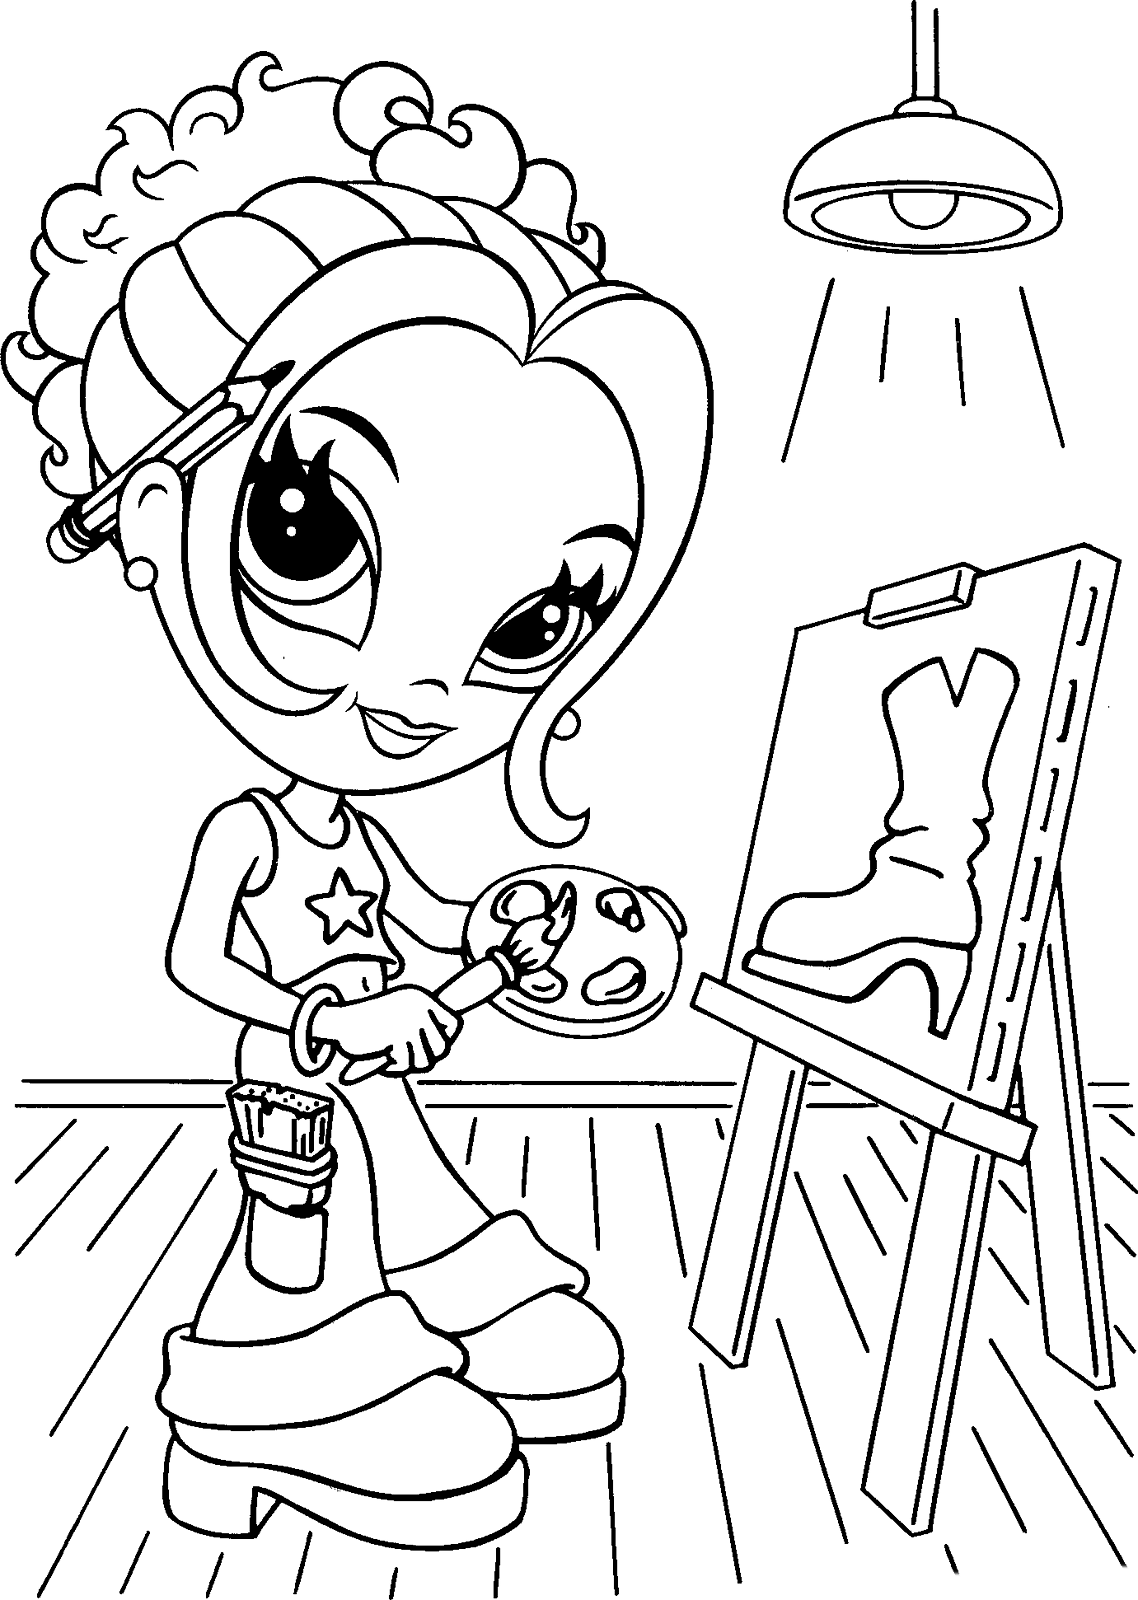 coloring pages of a girl coloring page the girl draws of coloring a pages girl 